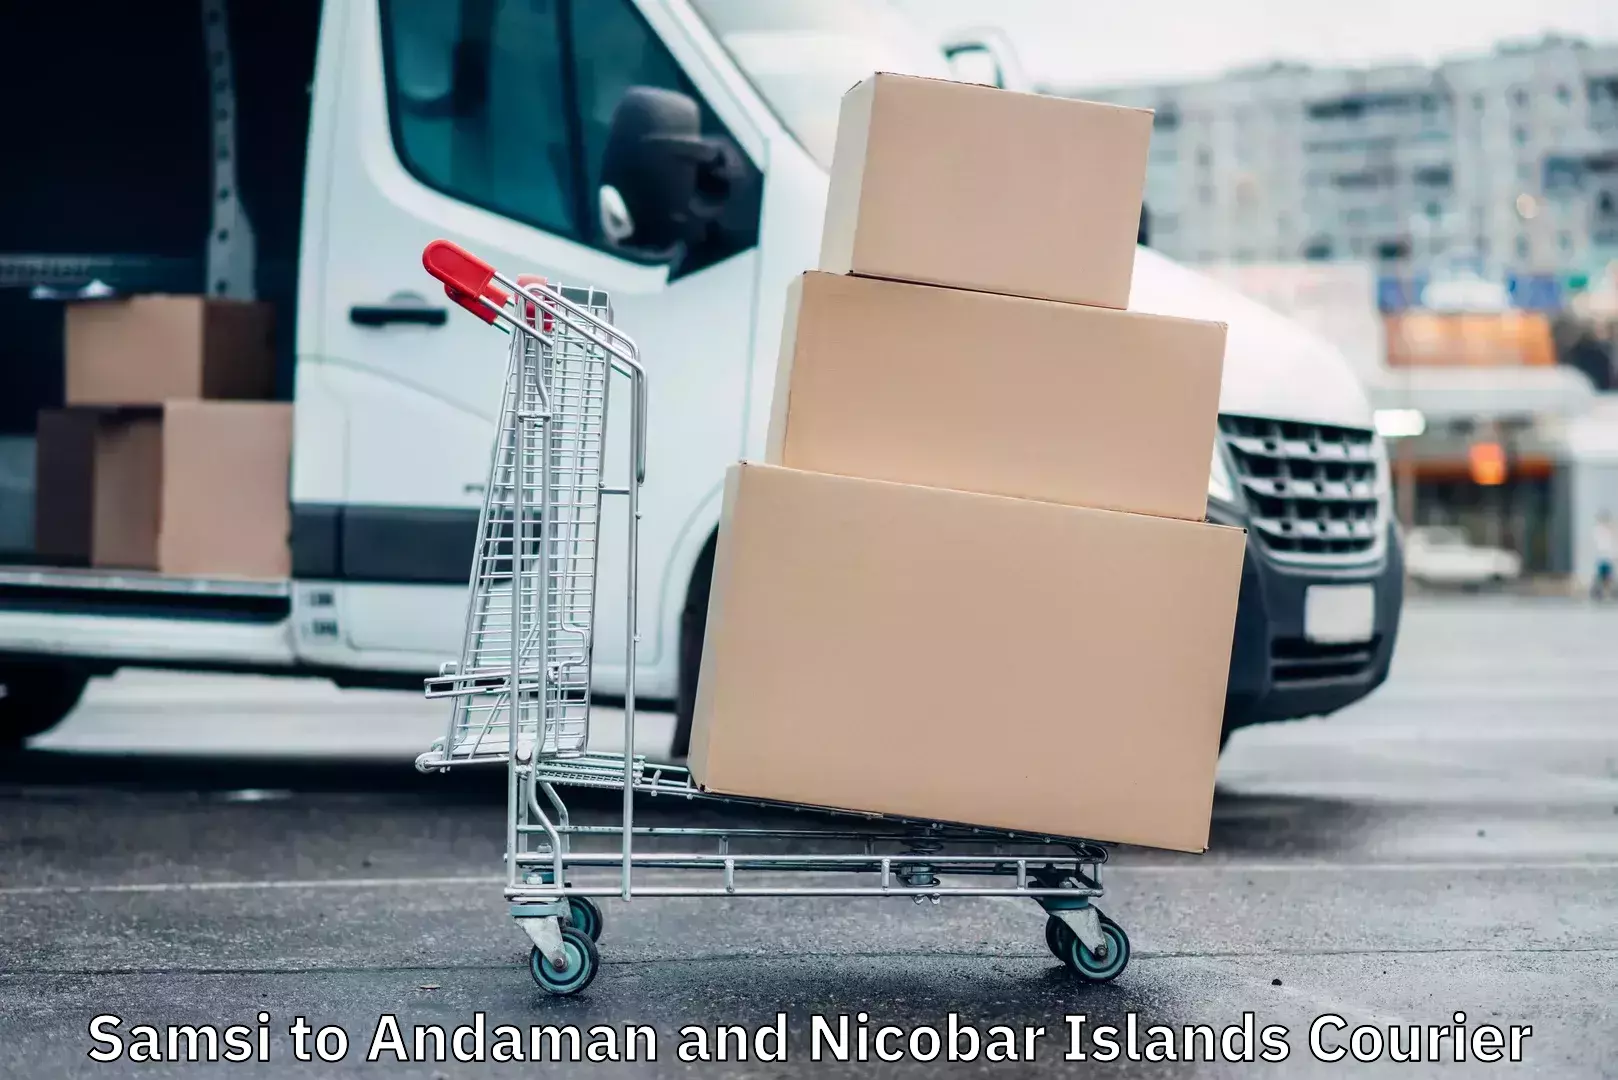 Efficient courier operations Samsi to Andaman and Nicobar Islands